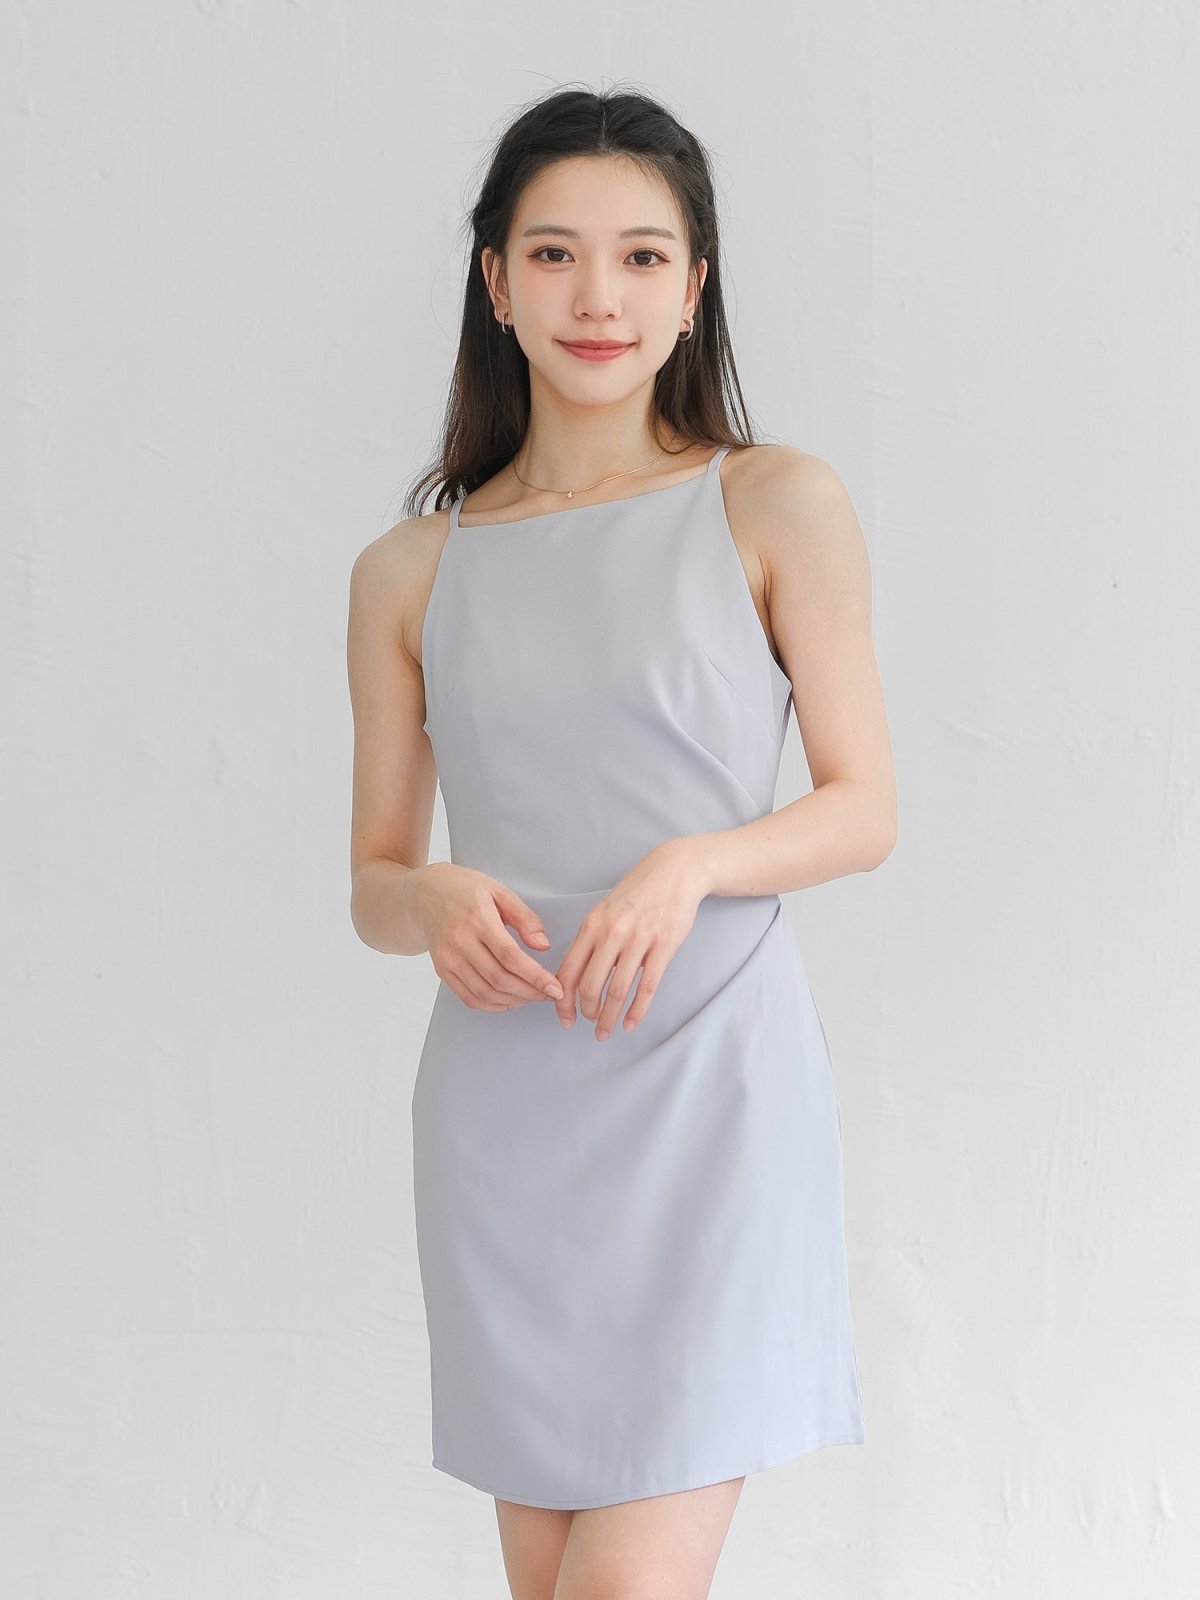 Charlotte Side Pleated Cocktail Dress - DAG-G-220195BabyBlueS - Baby Blue - S - D'ZAGE Designs